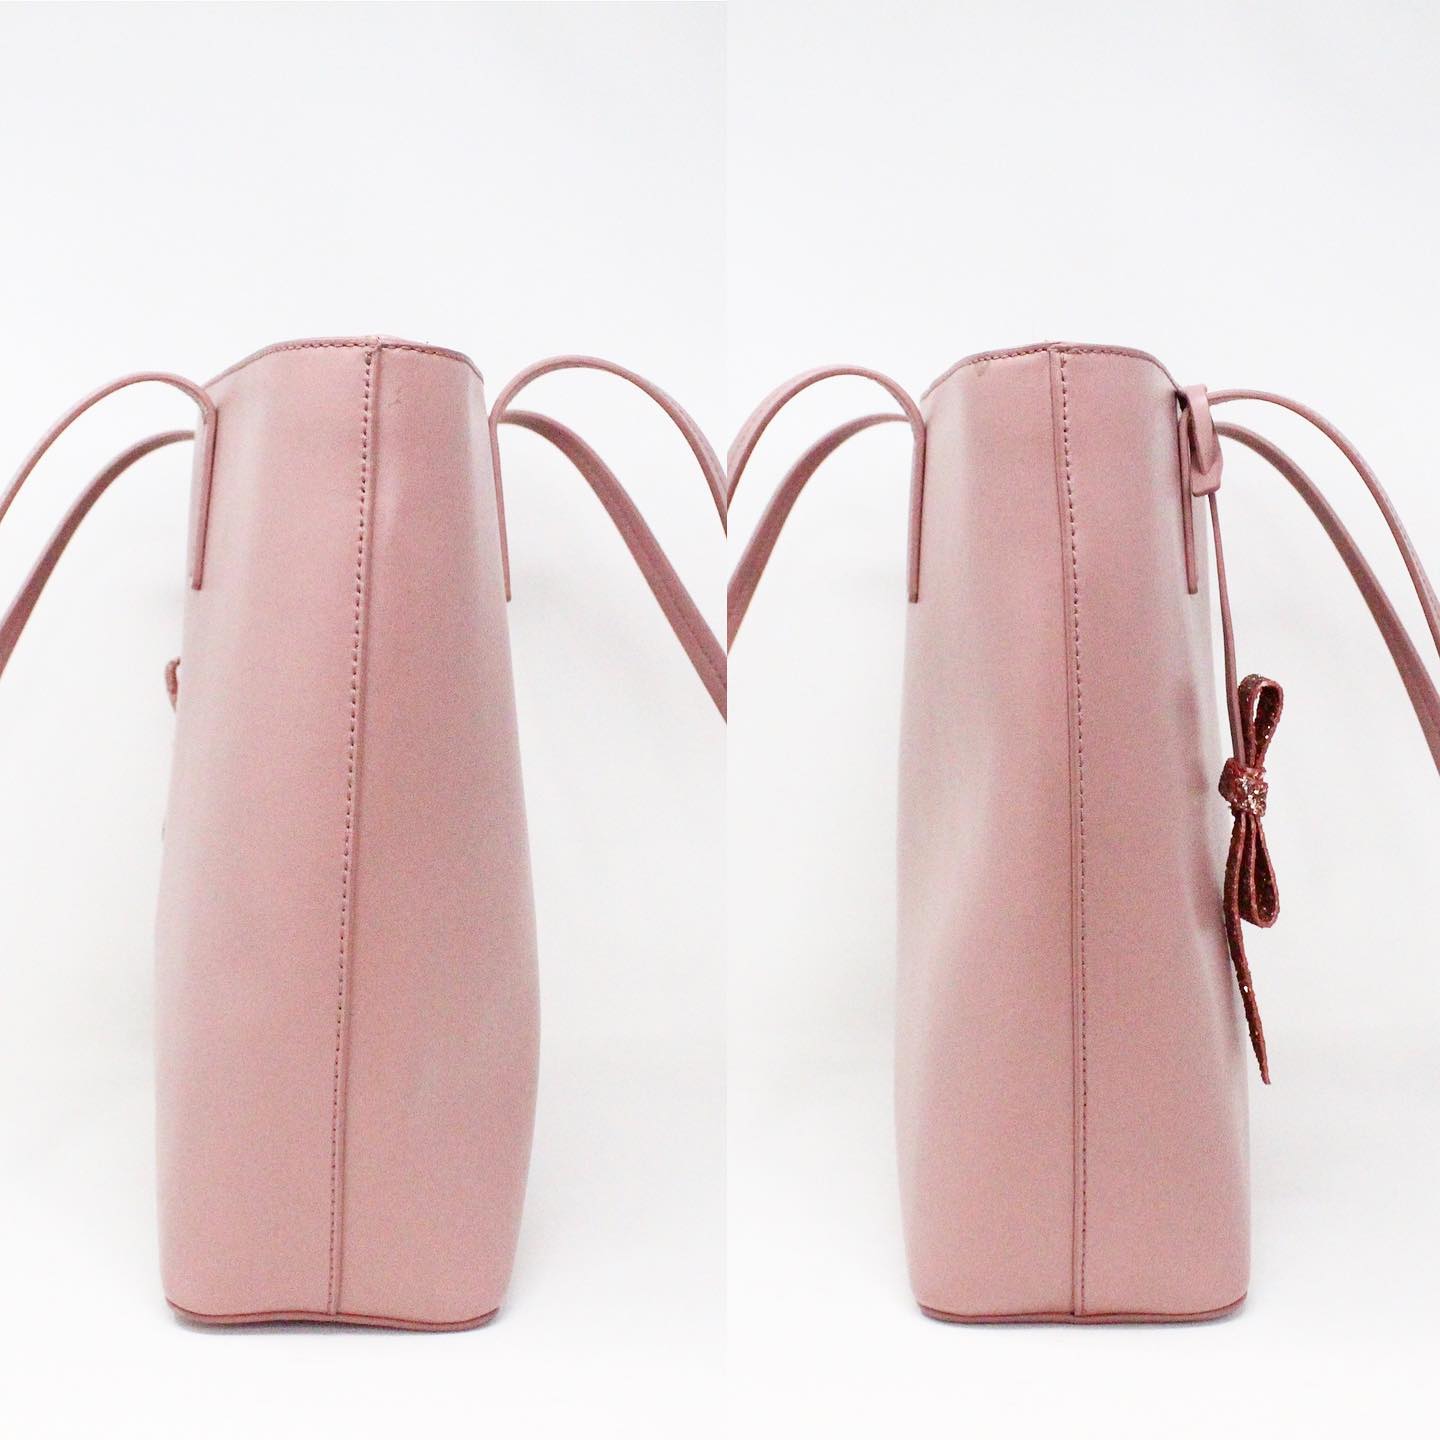 ON SALE* KATE SPADE #36464 Pastel Pink Smooth Leather Tote Bag